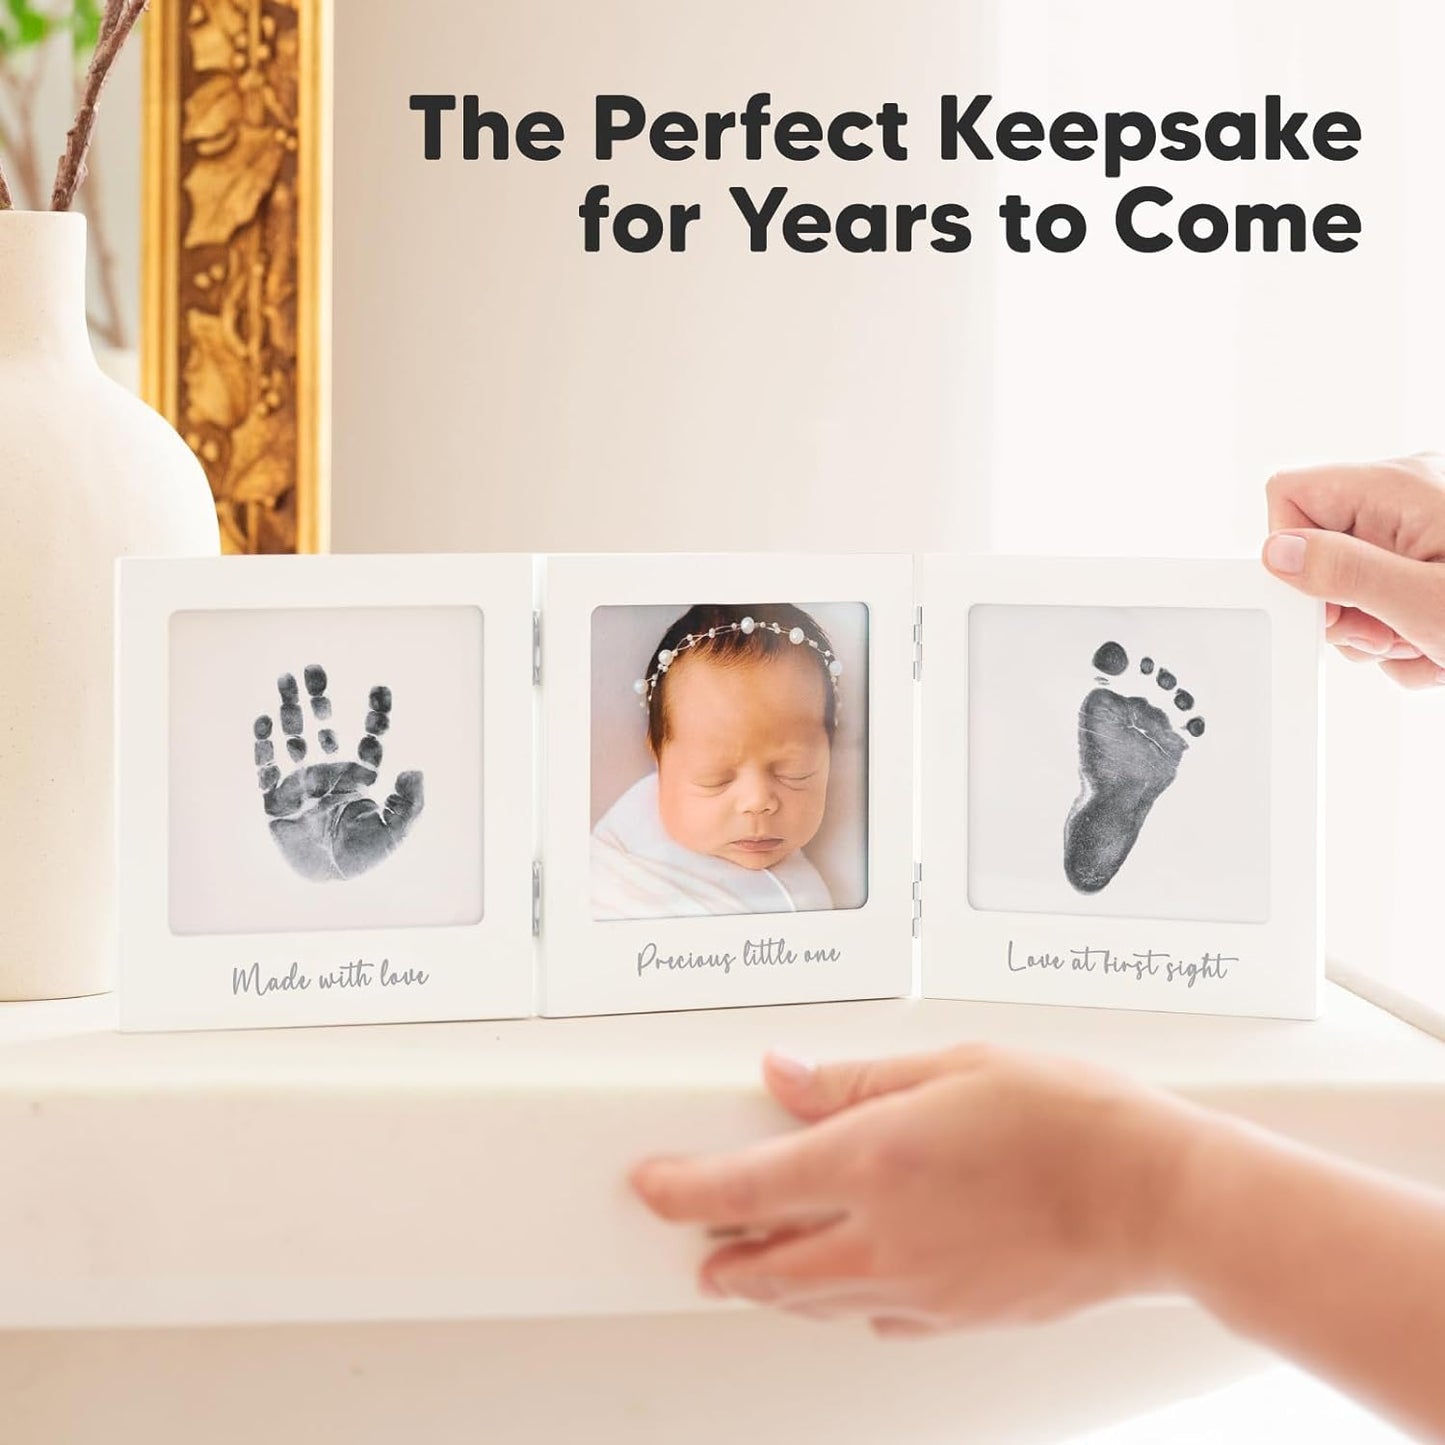 Baby Handprint and Footprint Kit for Newborn Boys & Girls - Inkless Hand and Footprint Maker, Baby Picture Keepsake Frame, New Mom Baby Shower Gifts,Dog Paw Print Kit,Baby Registry (White/Gold)